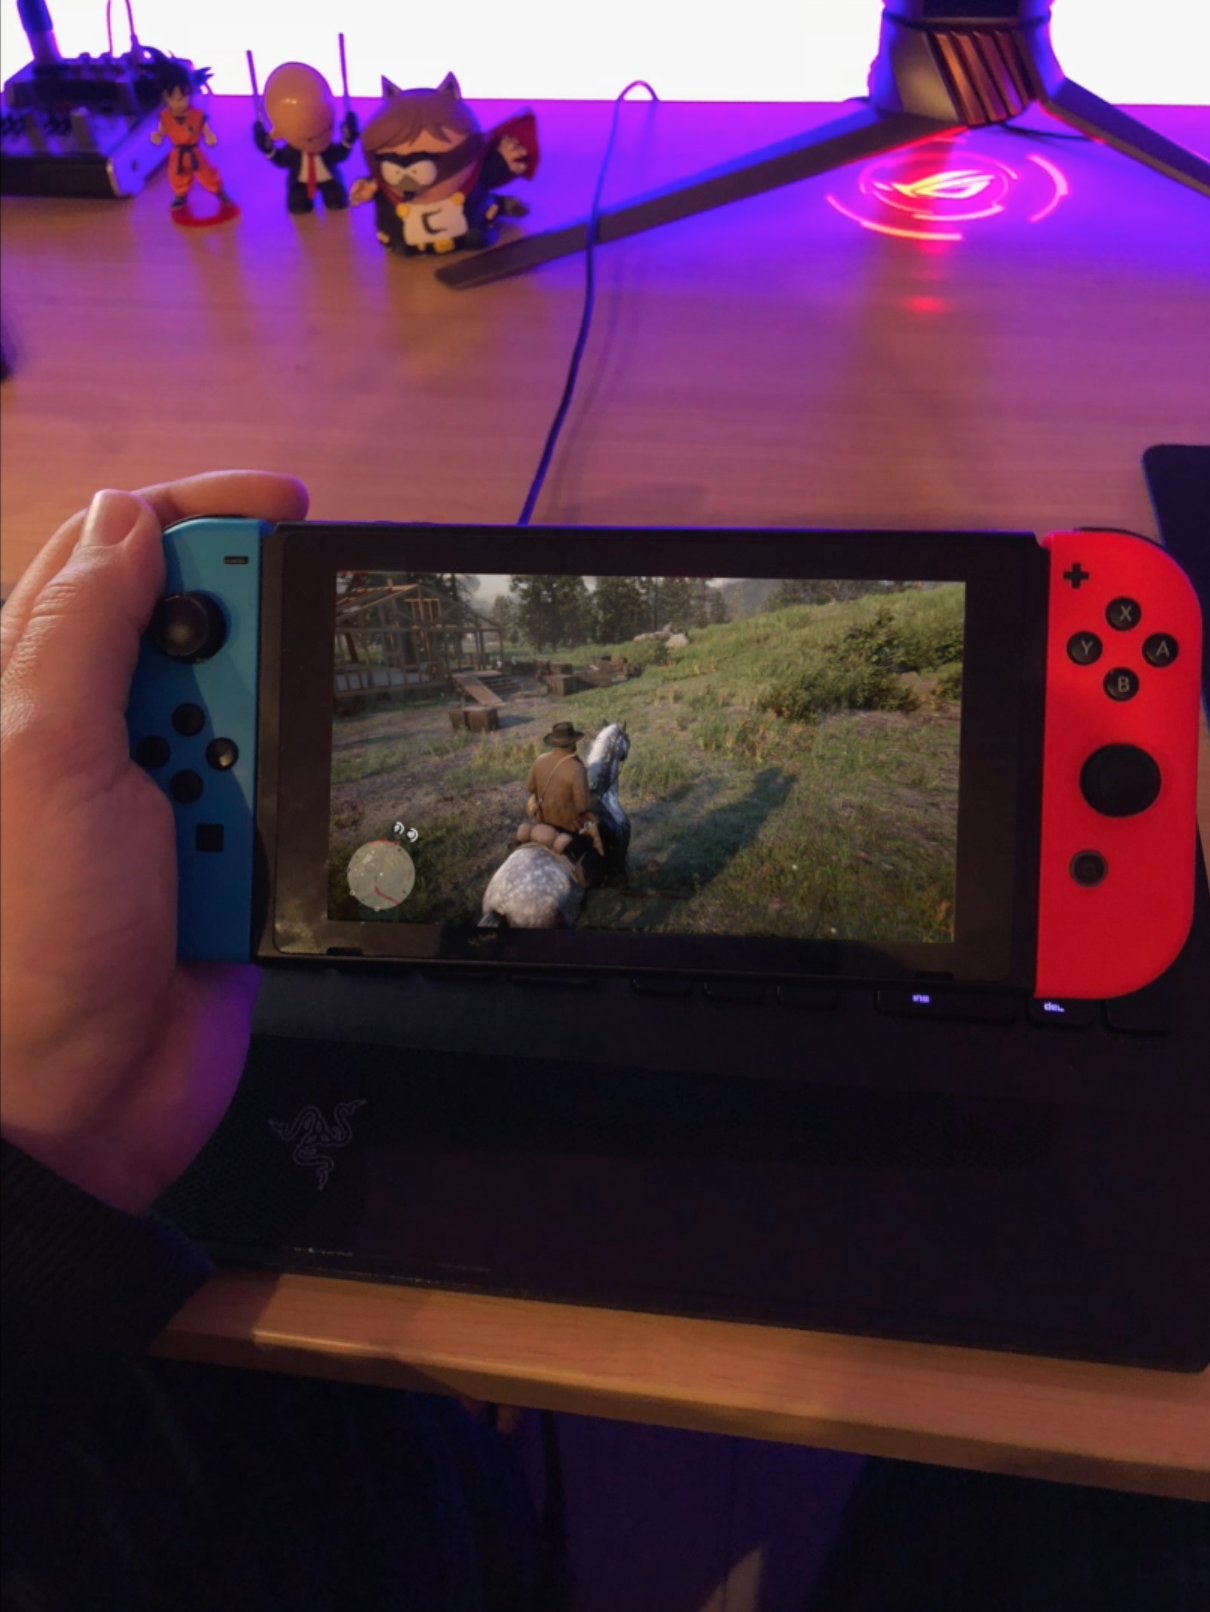 hul åbning Er Champ on Twitter: "Red Dead Redemption 2 on the Nintendo Switch runs  surprisingly well. So surprising I actually don't believe it...  https://t.co/a6d3CWkheZ" / Twitter